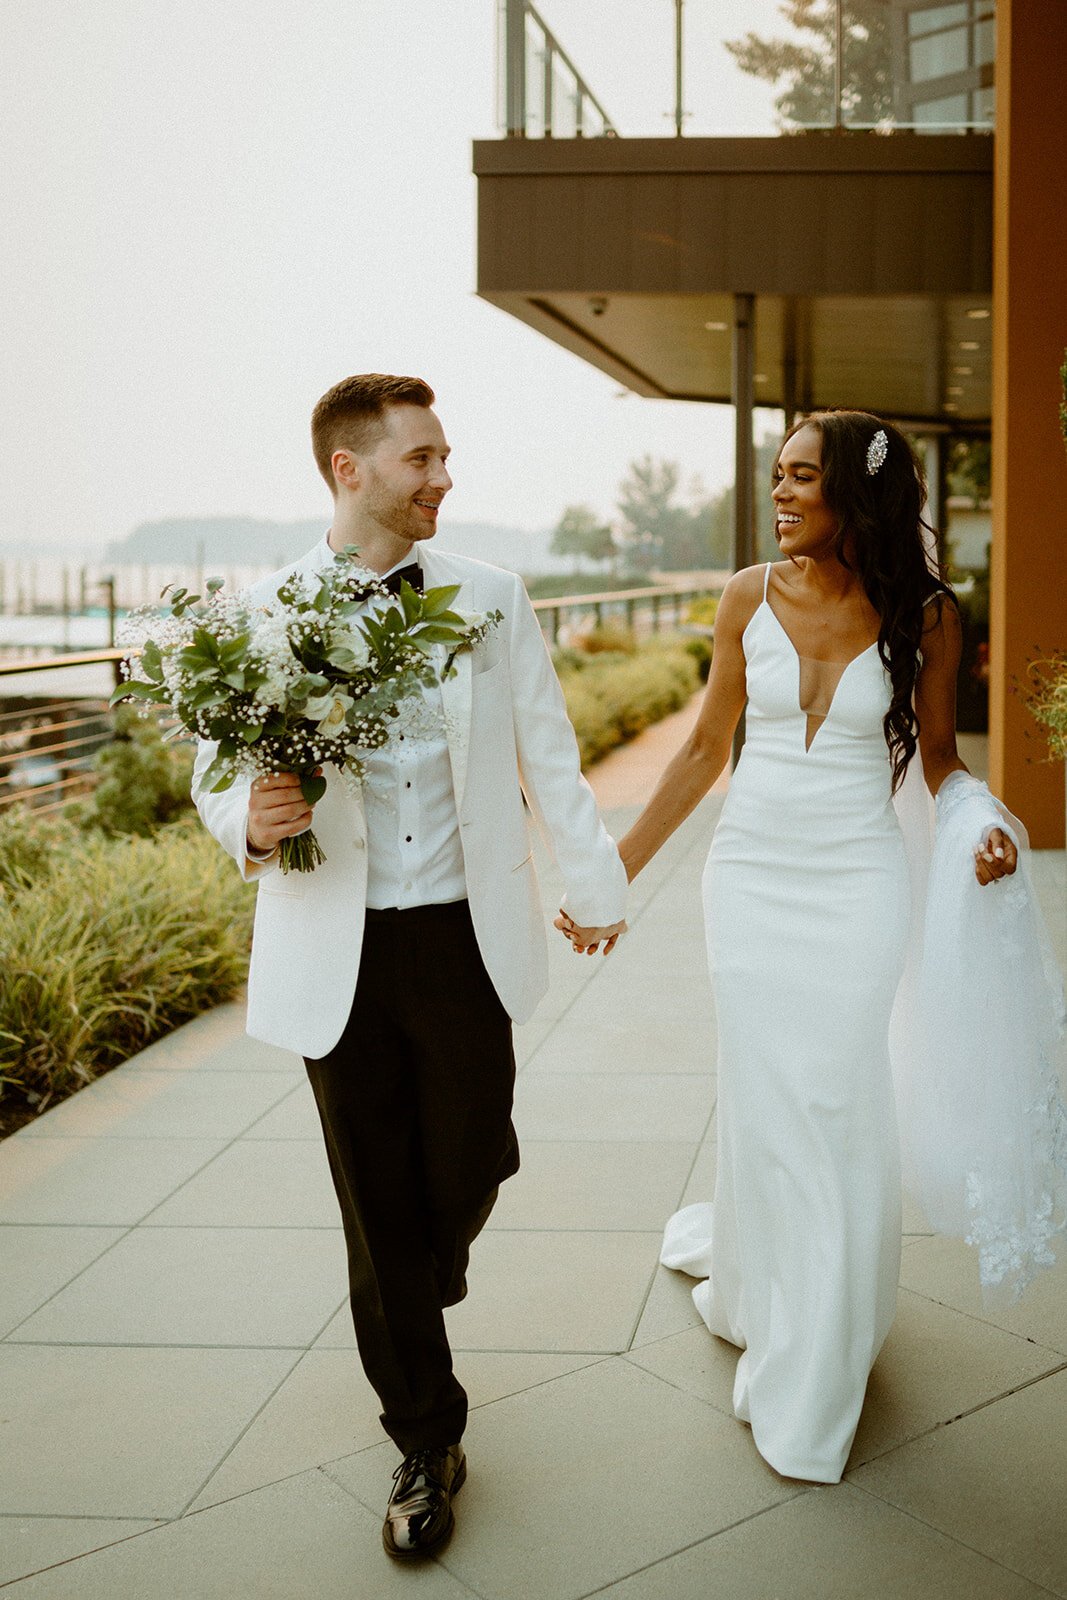  A bride wearing the deep-v fitted spaghetti strap wedding dress, TENNYSON, by The Label walking down the water front holding hands with the groom who is wearing a white tux and holding the bride’s bouquet 